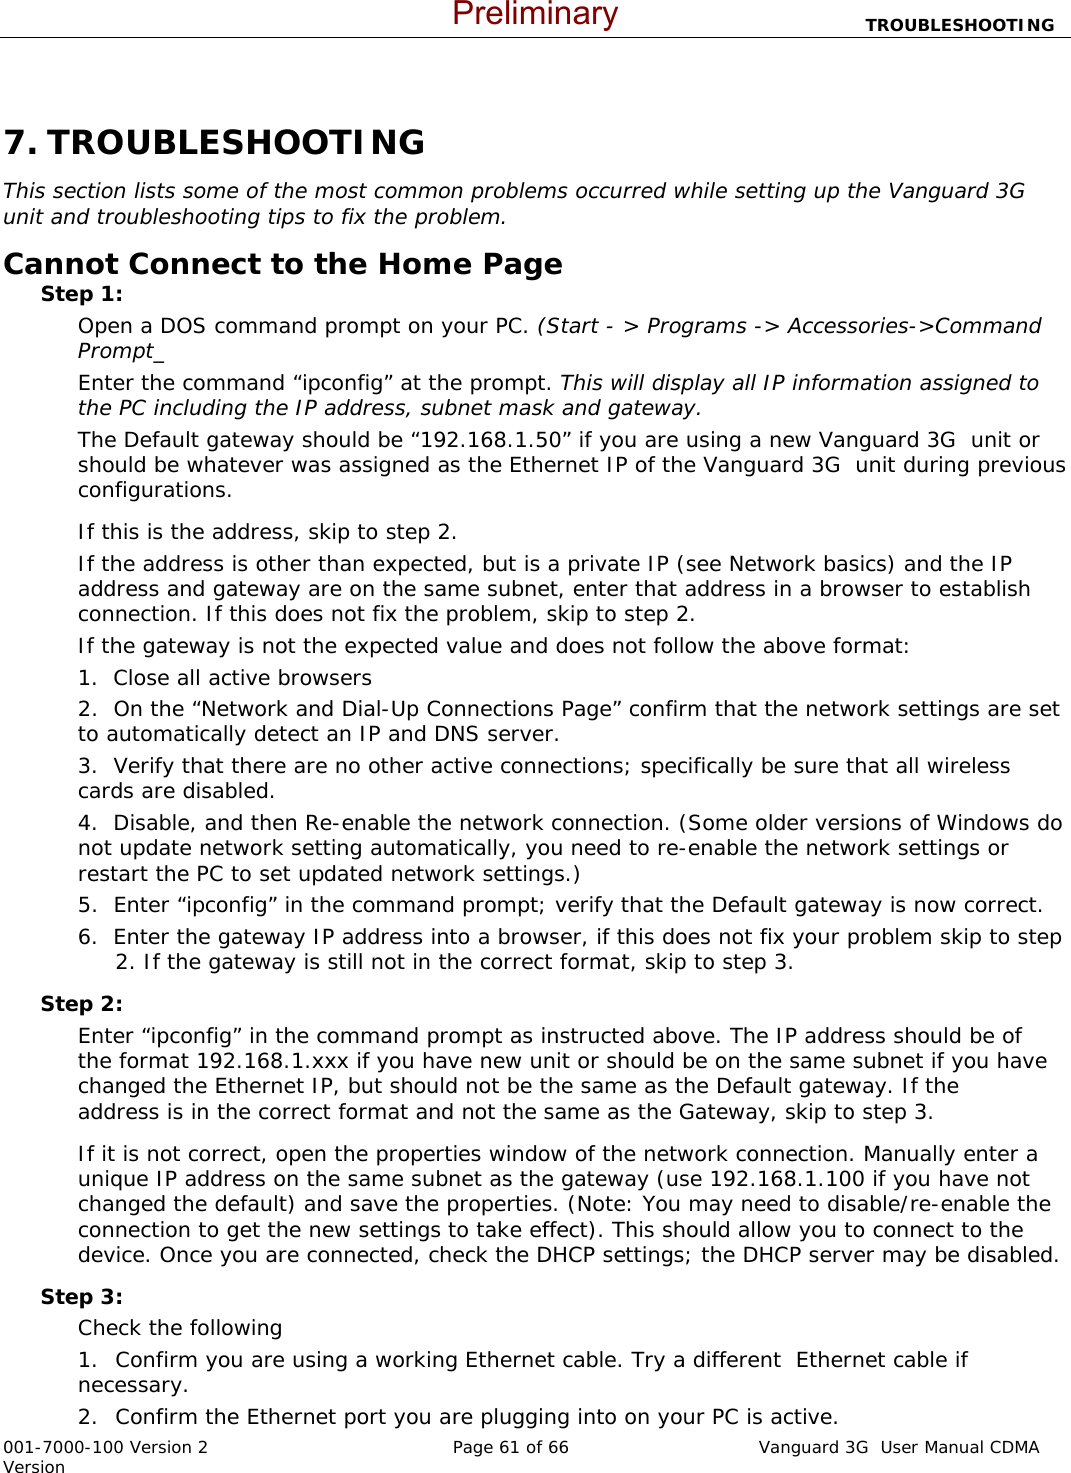                           TROUBLESHOOTING  001-7000-100 Version 2       Page 61 of 66       Vanguard 3G  User Manual CDMA Version  7. TROUBLESHOOTING This section lists some of the most common problems occurred while setting up the Vanguard 3G  unit and troubleshooting tips to fix the problem.   Cannot Connect to the Home Page   Step 1:   Open a DOS command prompt on your PC. (Start - &gt; Programs -&gt; Accessories-&gt;Command Prompt_ Enter the command “ipconfig” at the prompt. This will display all IP information assigned to the PC including the IP address, subnet mask and gateway.   The Default gateway should be “192.168.1.50” if you are using a new Vanguard 3G  unit or should be whatever was assigned as the Ethernet IP of the Vanguard 3G  unit during previous configurations.     If this is the address, skip to step 2.     If the address is other than expected, but is a private IP (see Network basics) and the IP address and gateway are on the same subnet, enter that address in a browser to establish connection. If this does not fix the problem, skip to step 2. If the gateway is not the expected value and does not follow the above format: 1.  Close all active browsers 2.  On the “Network and Dial-Up Connections Page” confirm that the network settings are set to automatically detect an IP and DNS server. 3.  Verify that there are no other active connections; specifically be sure that all wireless cards are disabled.     4.  Disable, and then Re-enable the network connection. (Some older versions of Windows do not update network setting automatically, you need to re-enable the network settings or restart the PC to set updated network settings.) 5.  Enter “ipconfig” in the command prompt; verify that the Default gateway is now correct.     6.  Enter the gateway IP address into a browser, if this does not fix your problem skip to step    2. If the gateway is still not in the correct format, skip to step 3.   Step 2:   Enter “ipconfig” in the command prompt as instructed above. The IP address should be of the format 192.168.1.xxx if you have new unit or should be on the same subnet if you have  changed the Ethernet IP, but should not be the same as the Default gateway. If the  address is in the correct format and not the same as the Gateway, skip to step 3.   If it is not correct, open the properties window of the network connection. Manually enter a unique IP address on the same subnet as the gateway (use 192.168.1.100 if you have not changed the default) and save the properties. (Note: You may need to disable/re-enable the connection to get the new settings to take effect). This should allow you to connect to the device. Once you are connected, check the DHCP settings; the DHCP server may be disabled.   Step 3:   Check the following 1. Confirm you are using a working Ethernet cable. Try a different  Ethernet cable if necessary.   2. Confirm the Ethernet port you are plugging into on your PC is active. Preliminary